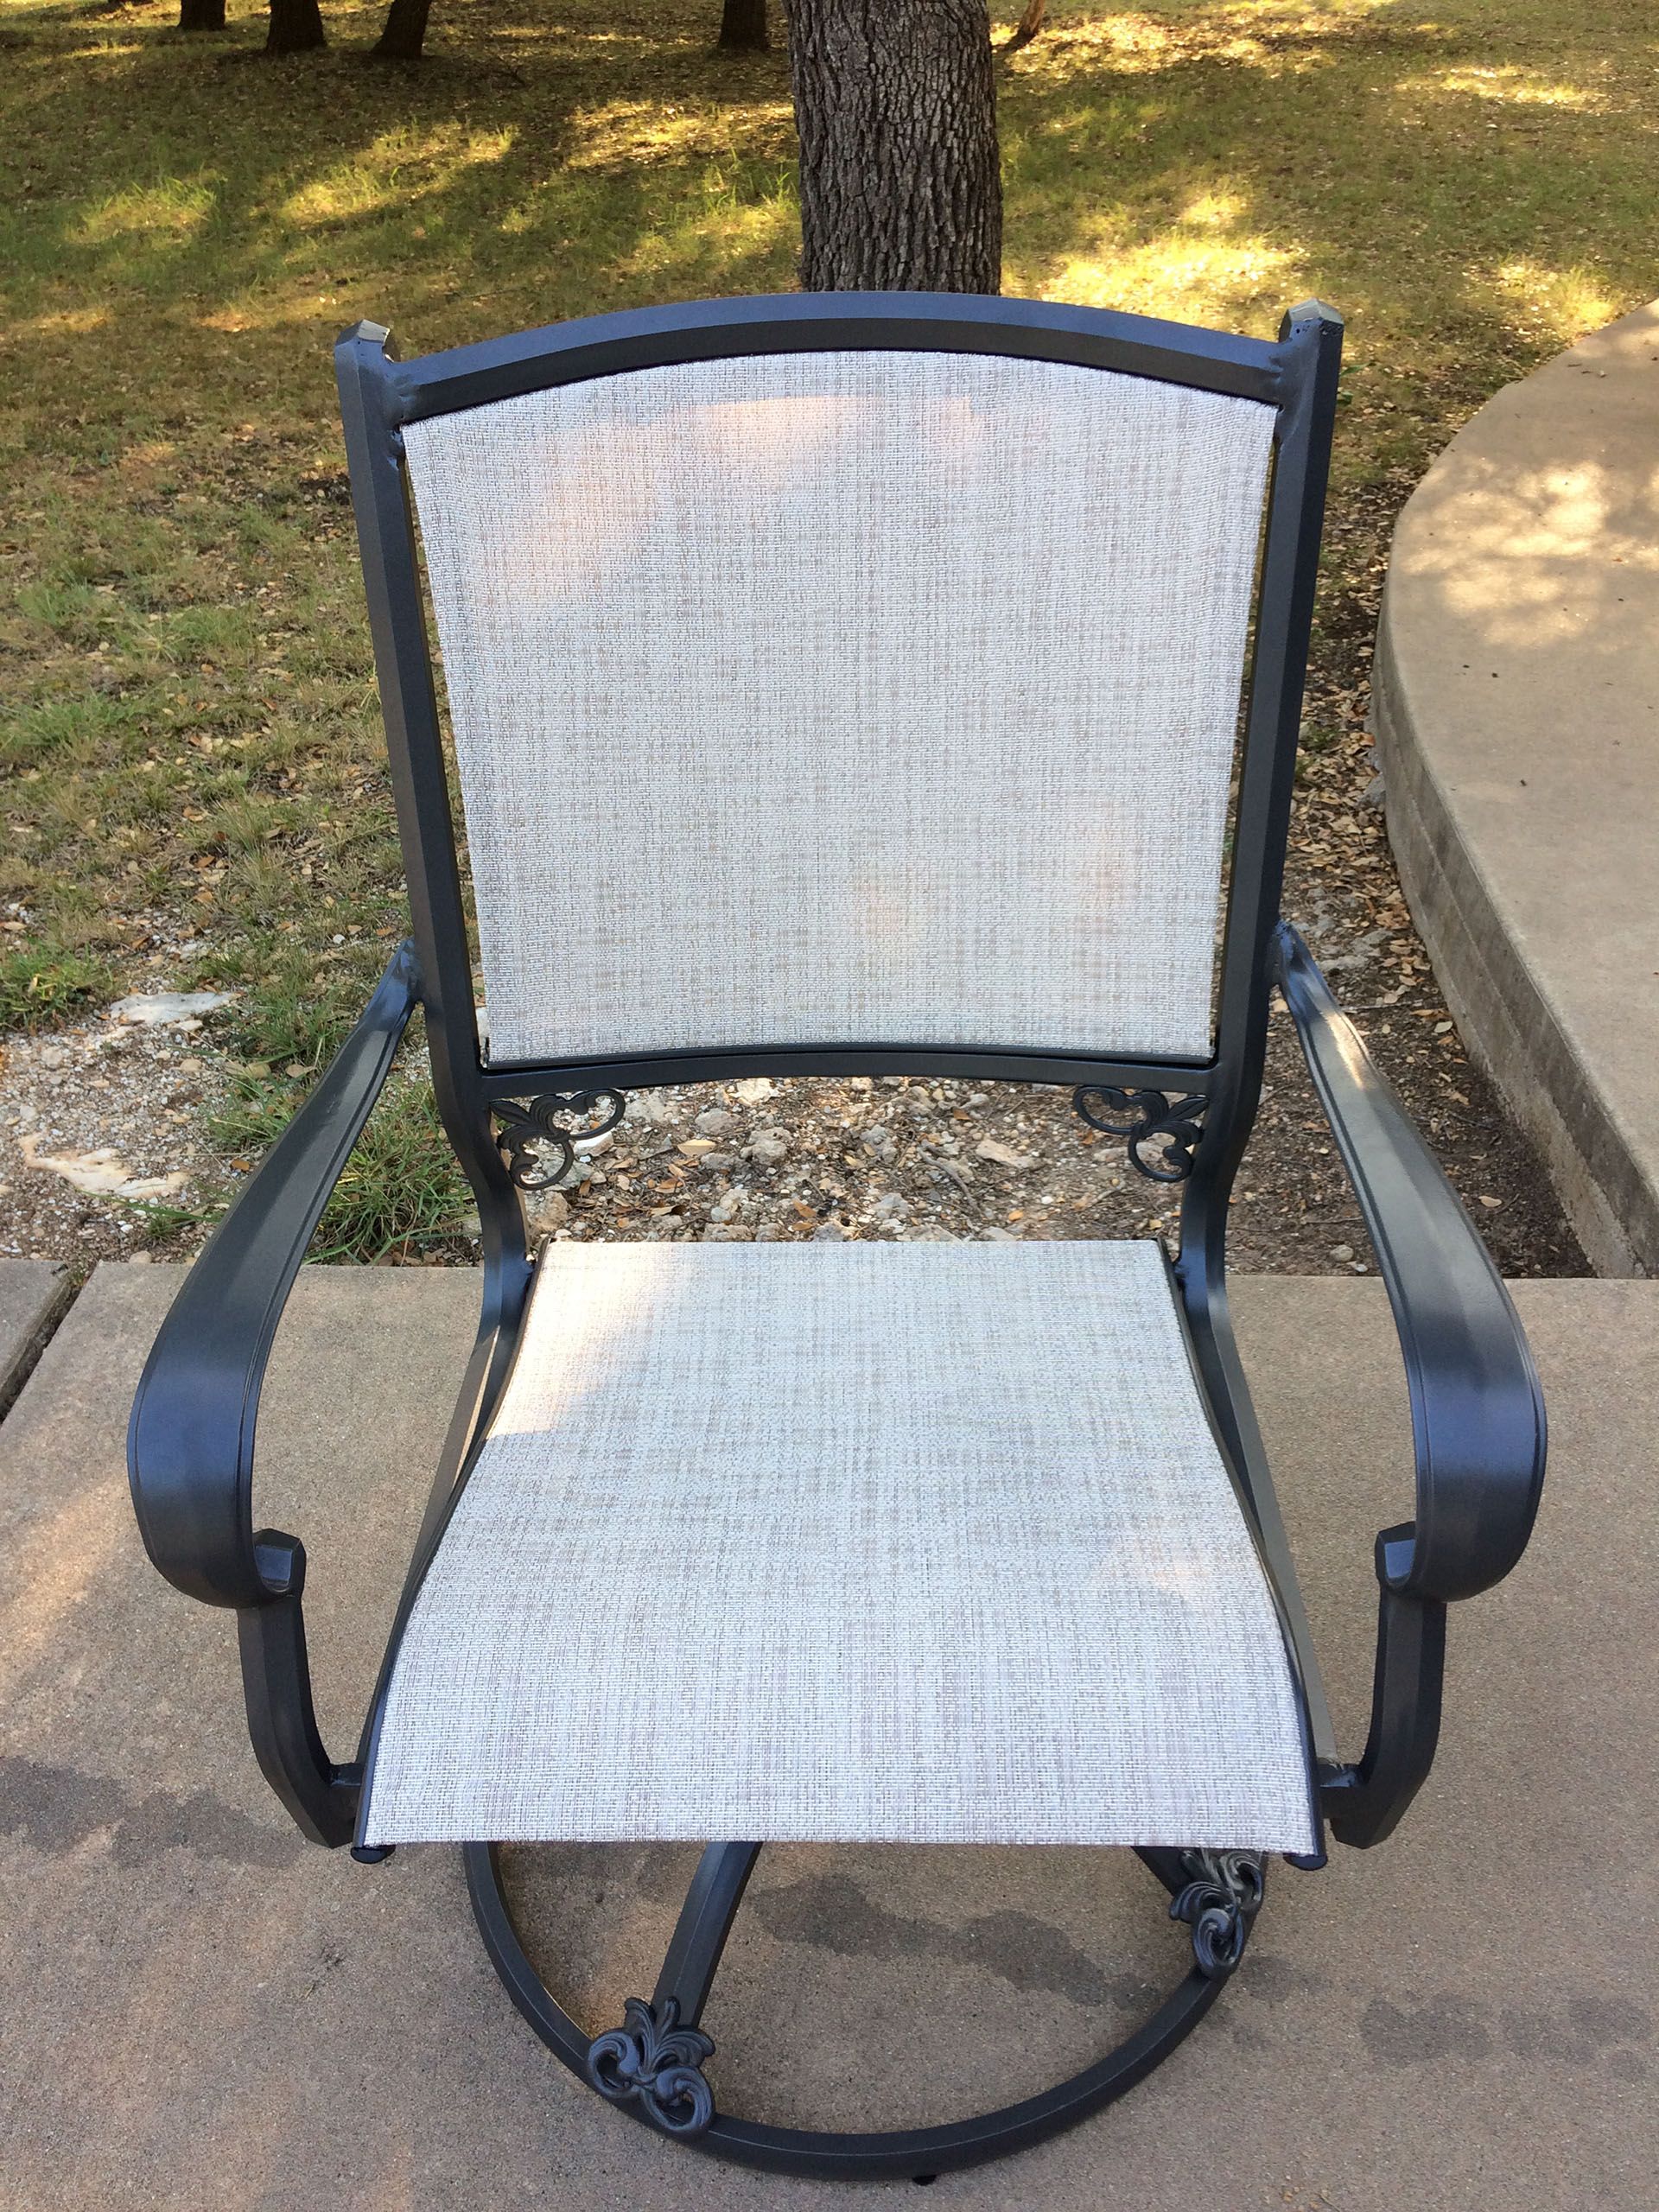 Sling Replacement Ace Outdoor, How To Replace Patio Sling Fabric